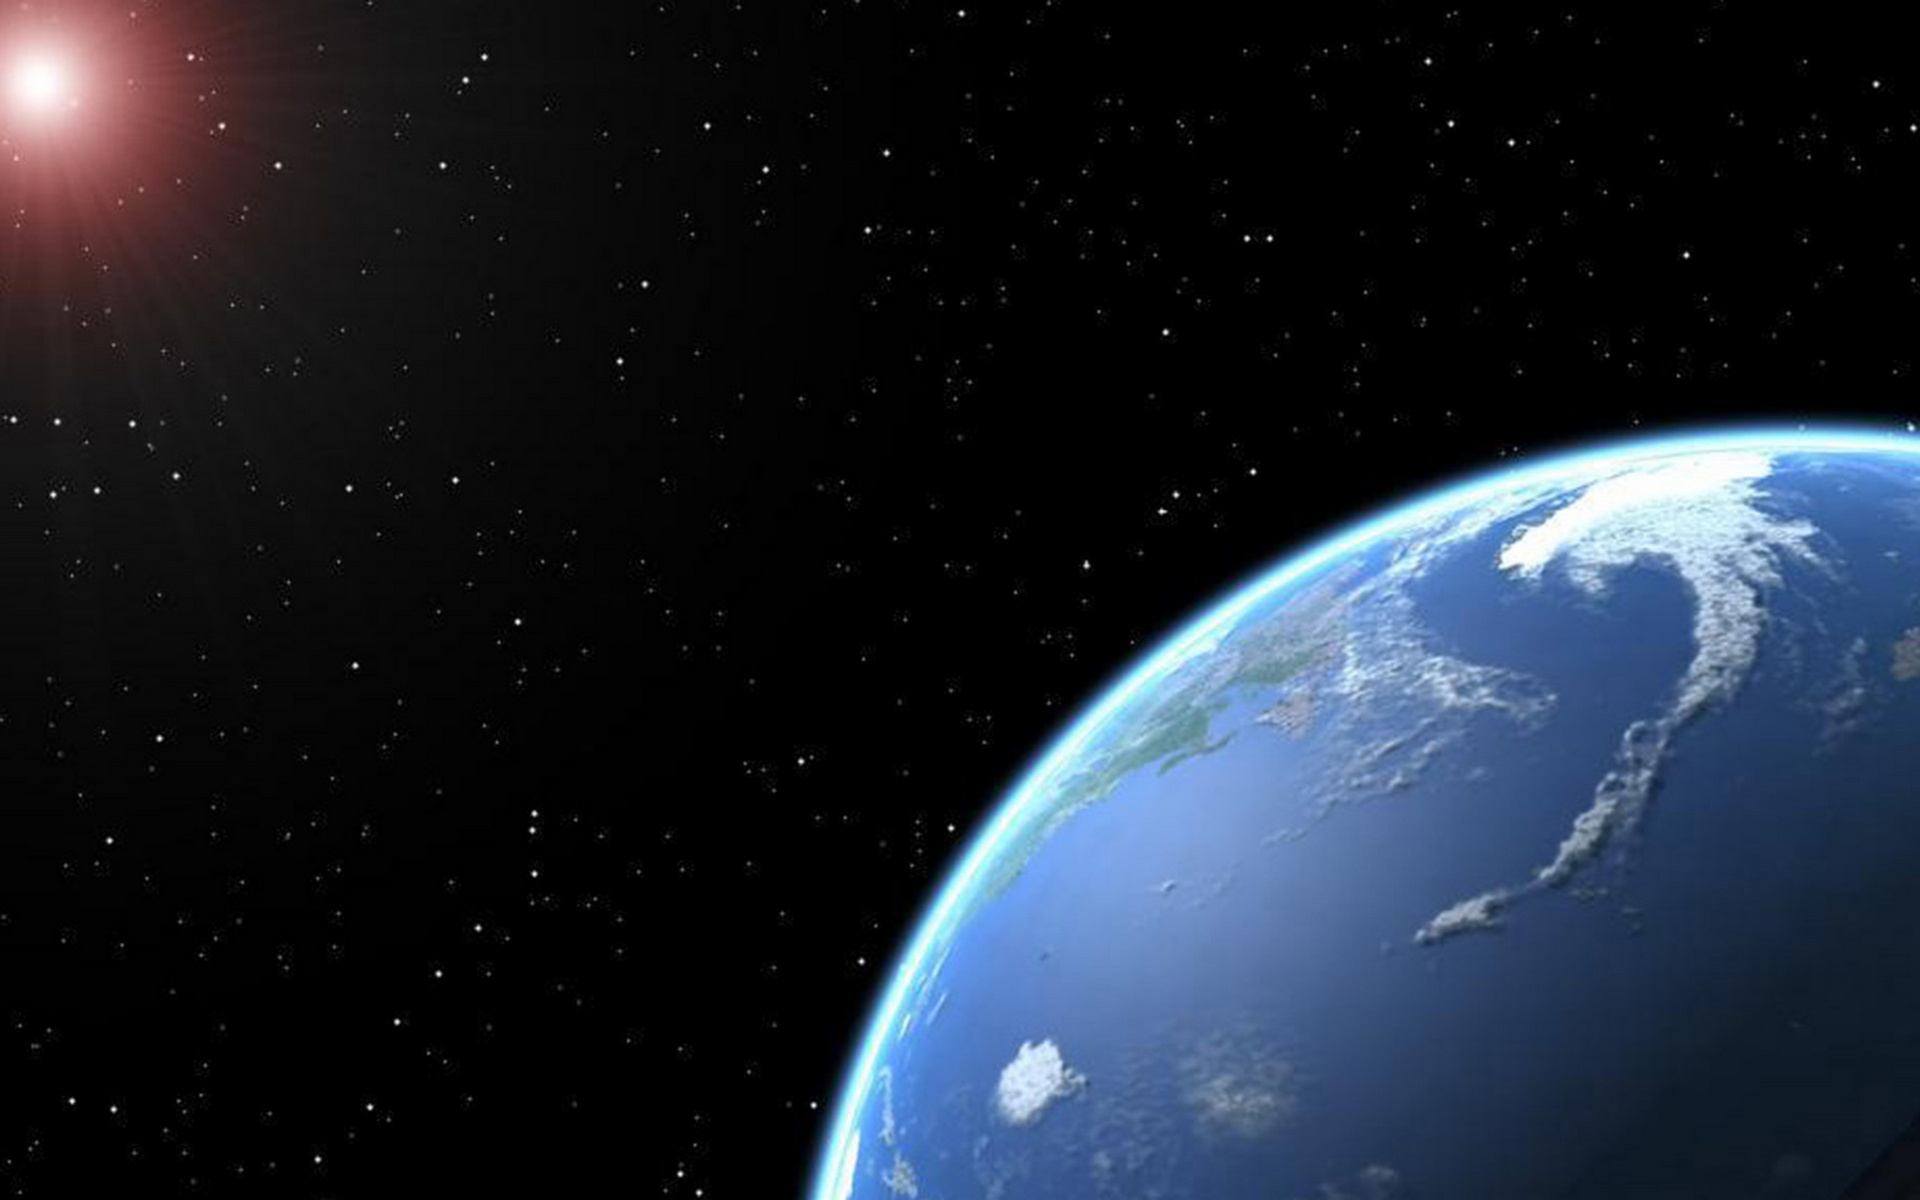 Wallpapers stars earth water on the desktop